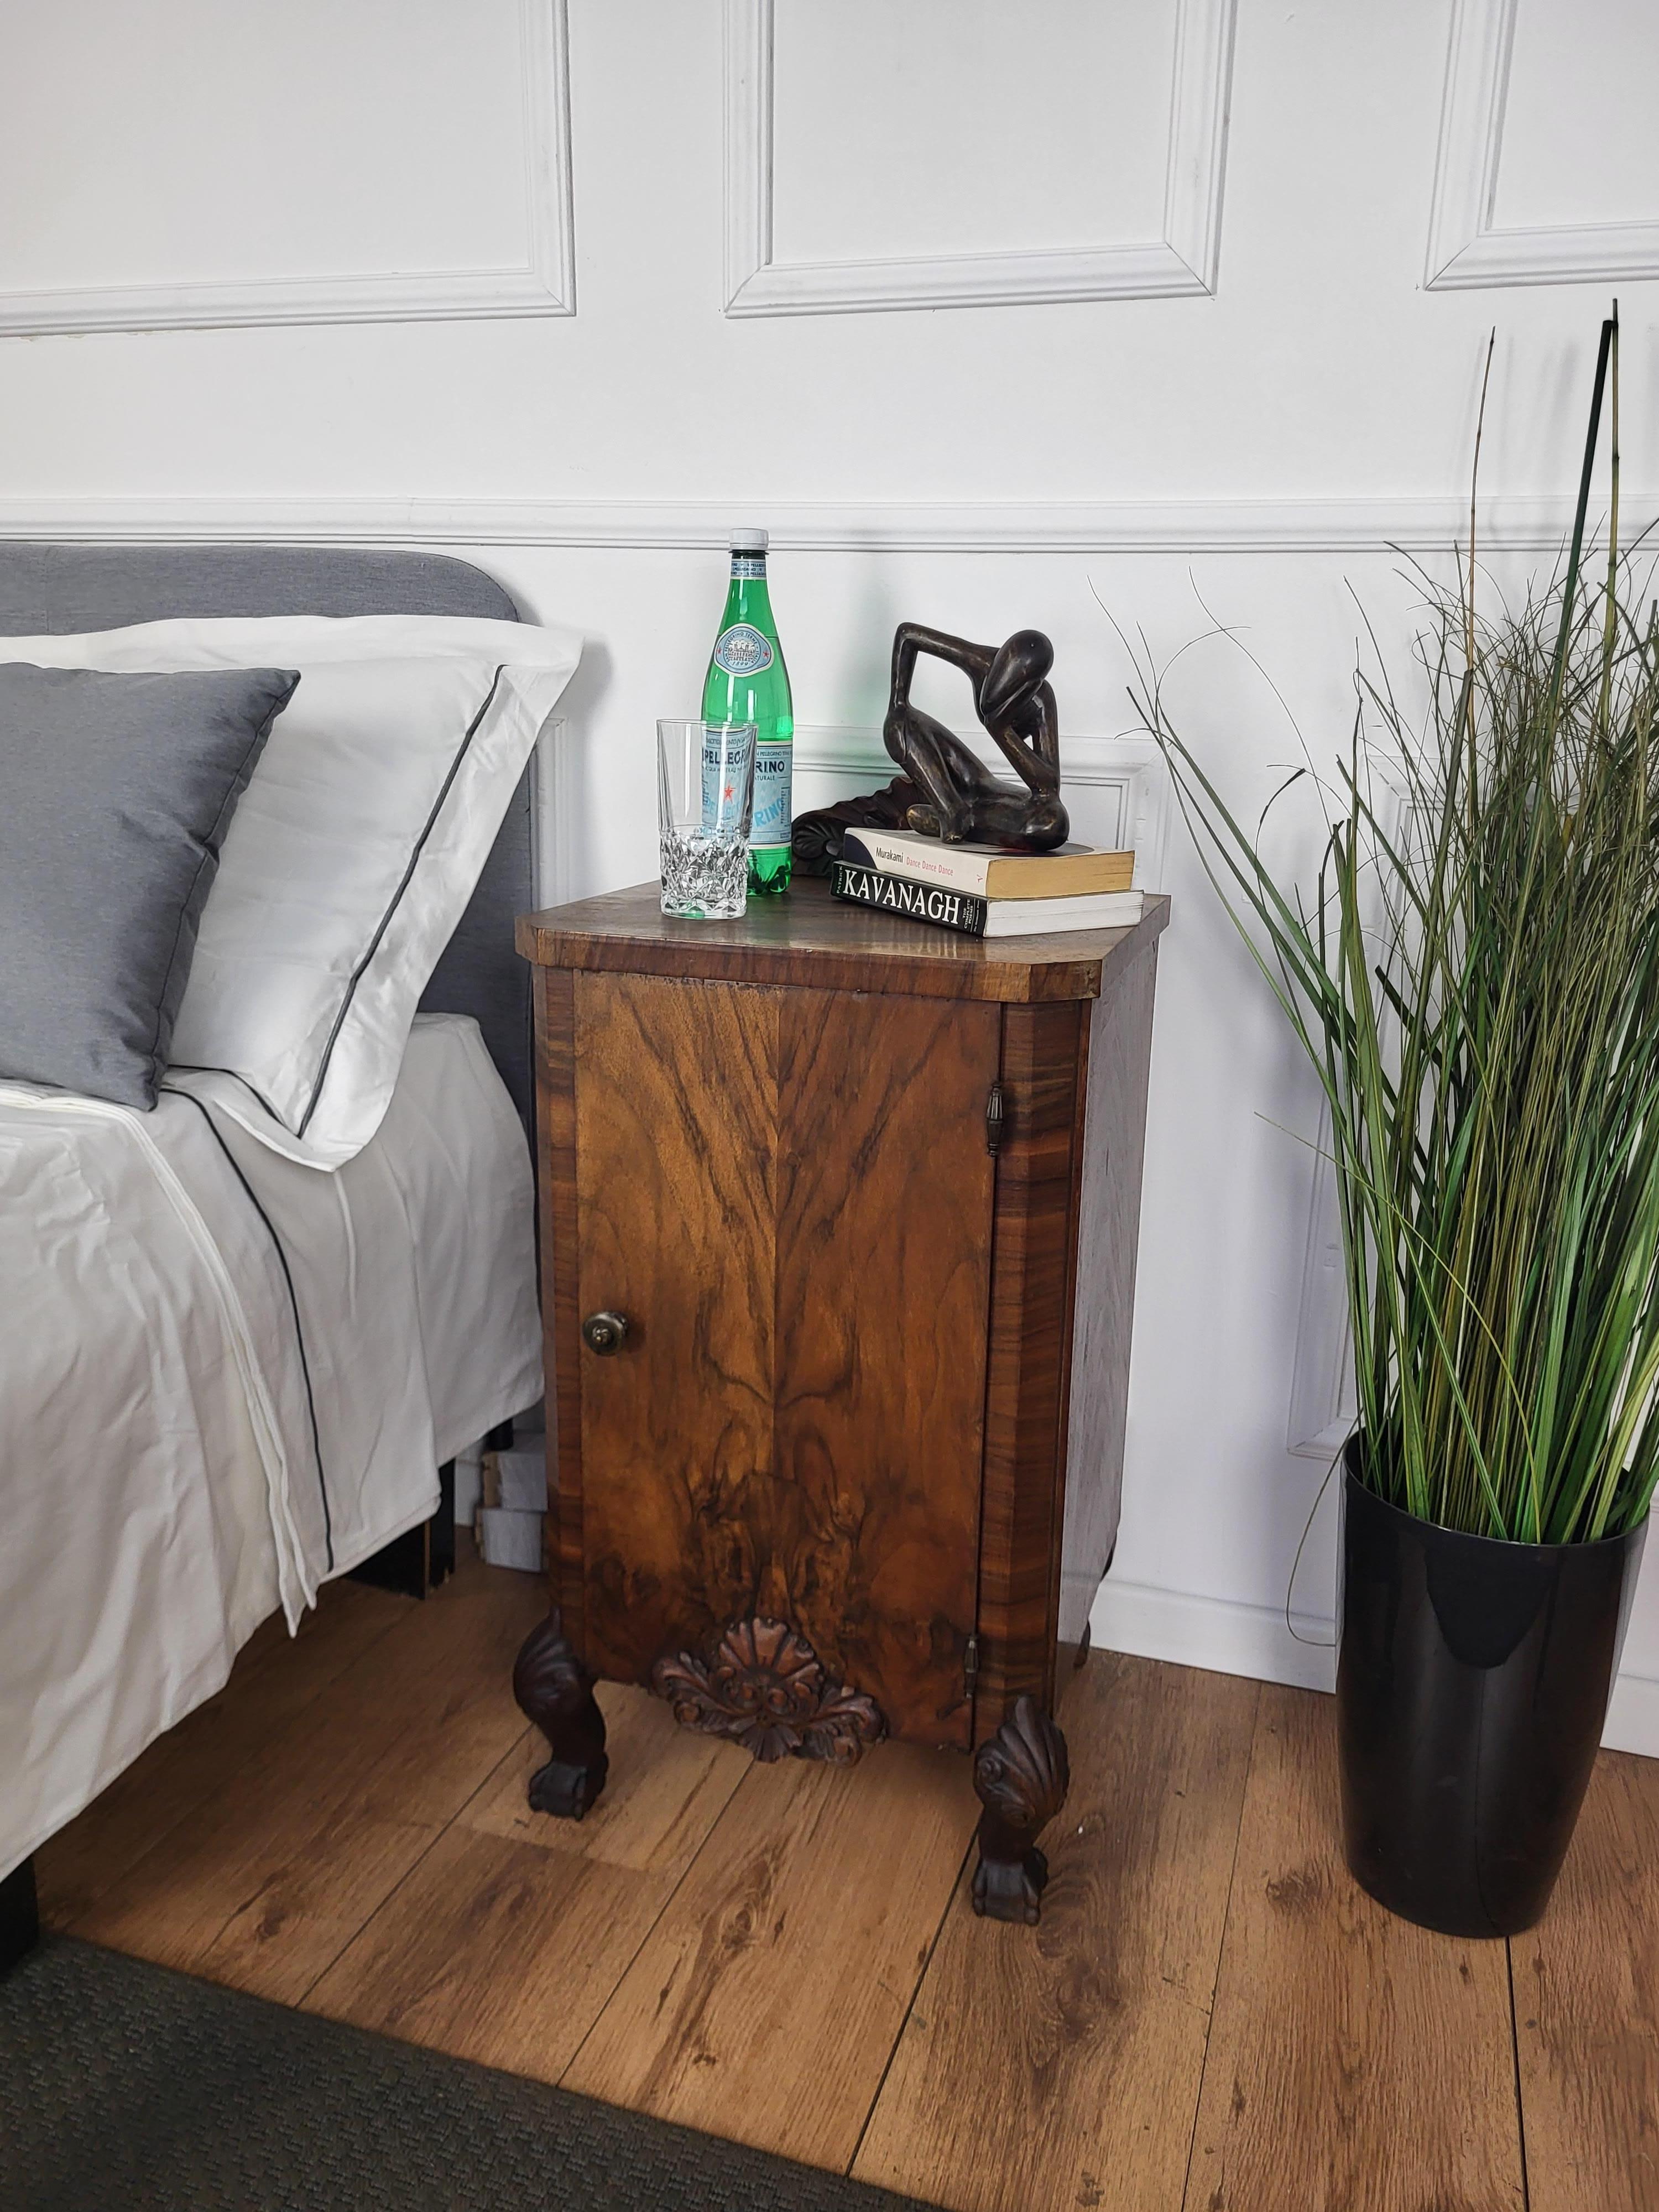 Very elegant and refined pair of Italian 1940s Art Deco bedside tables with great design shape and decors in veneer burl walnut briar wood with front door and inside drawer. This night stands make a great look in any style bedroom, as a